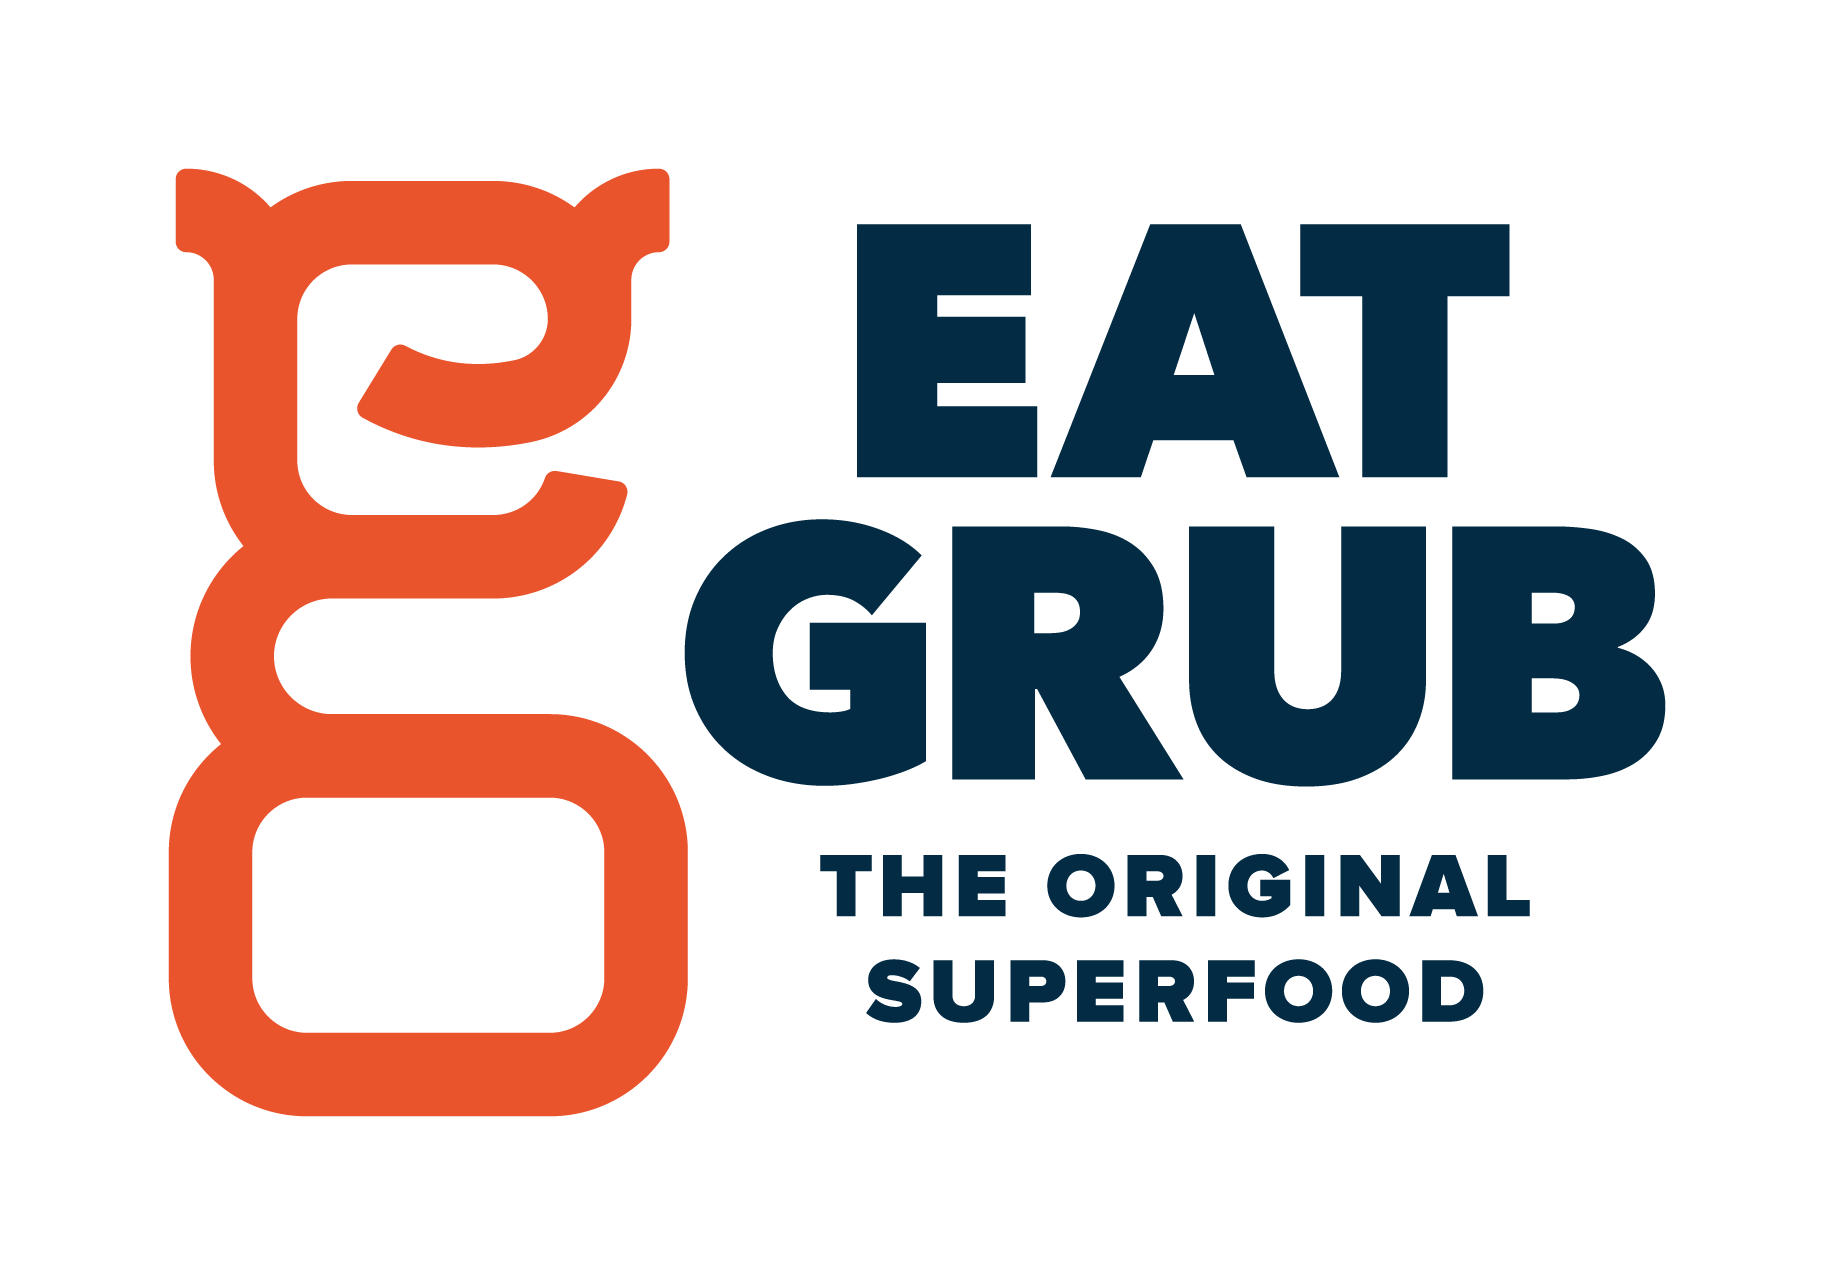 Eat Grub - Delicious edible insects for snacking and cooking